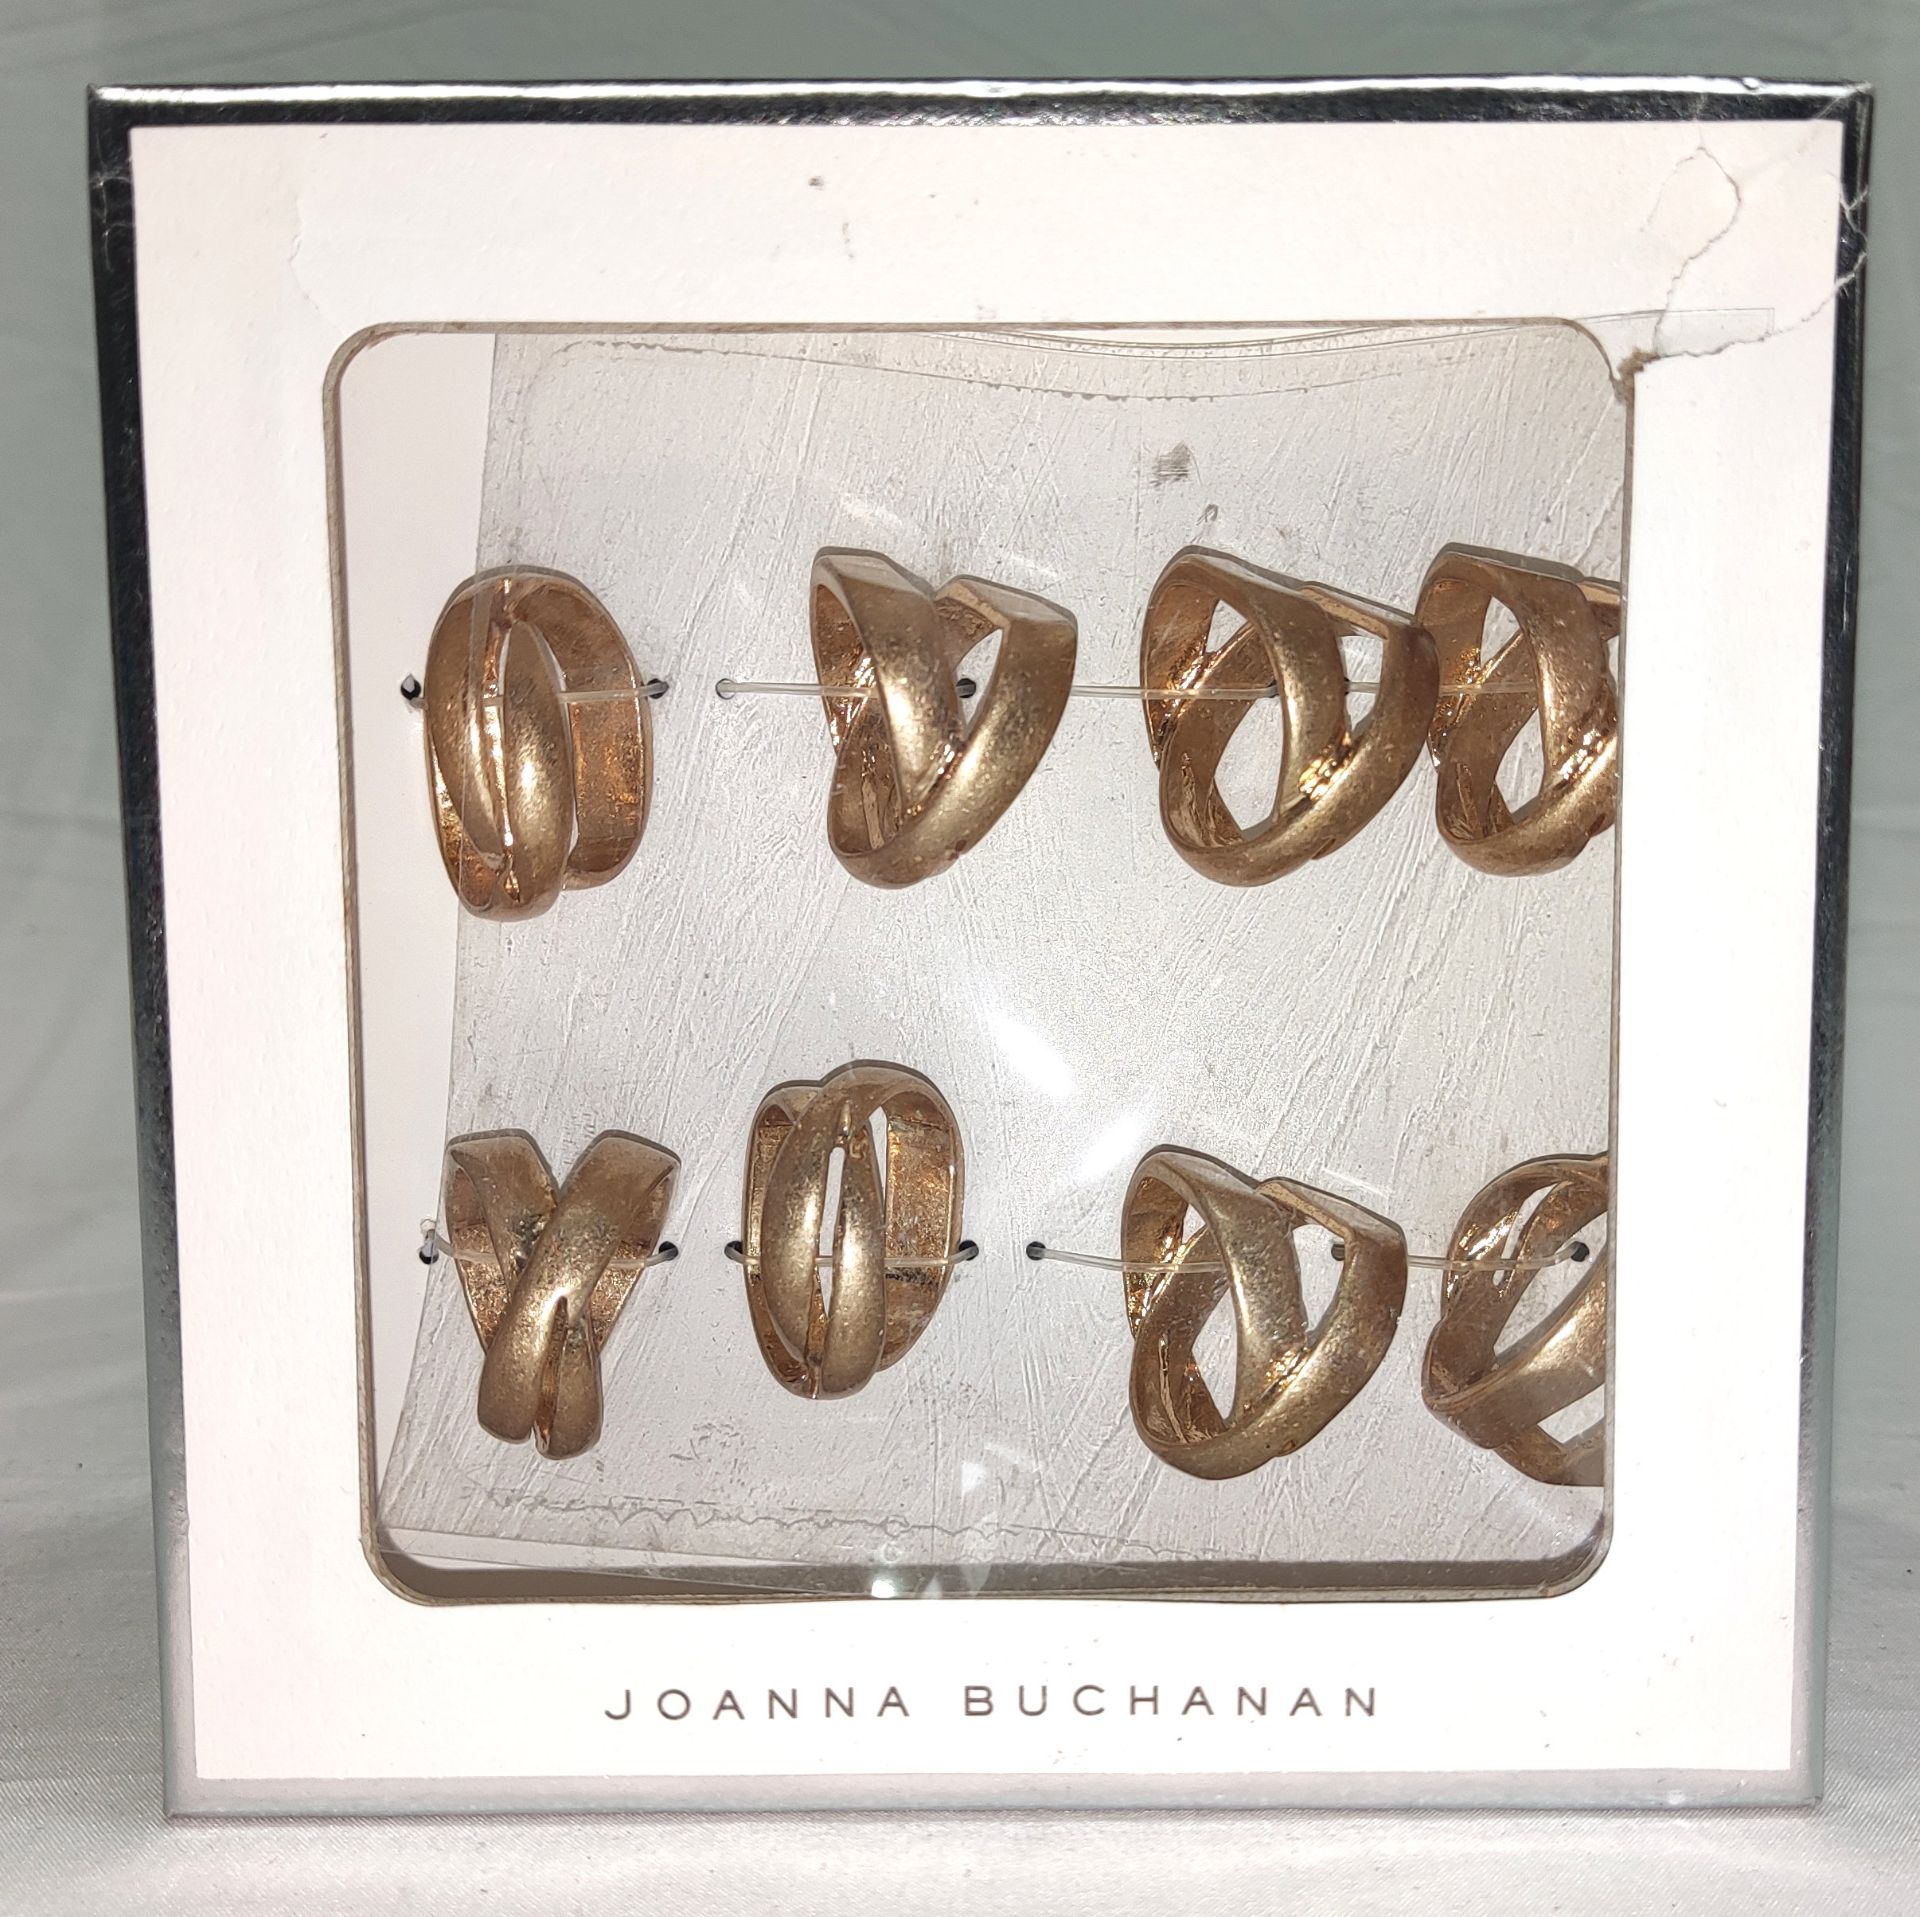 1 x JOANNA BUCHANAN Knot Placecard Holders - Set Of 8 - New/Boxed - Original RRP £168 - Ref: - Image 11 of 19